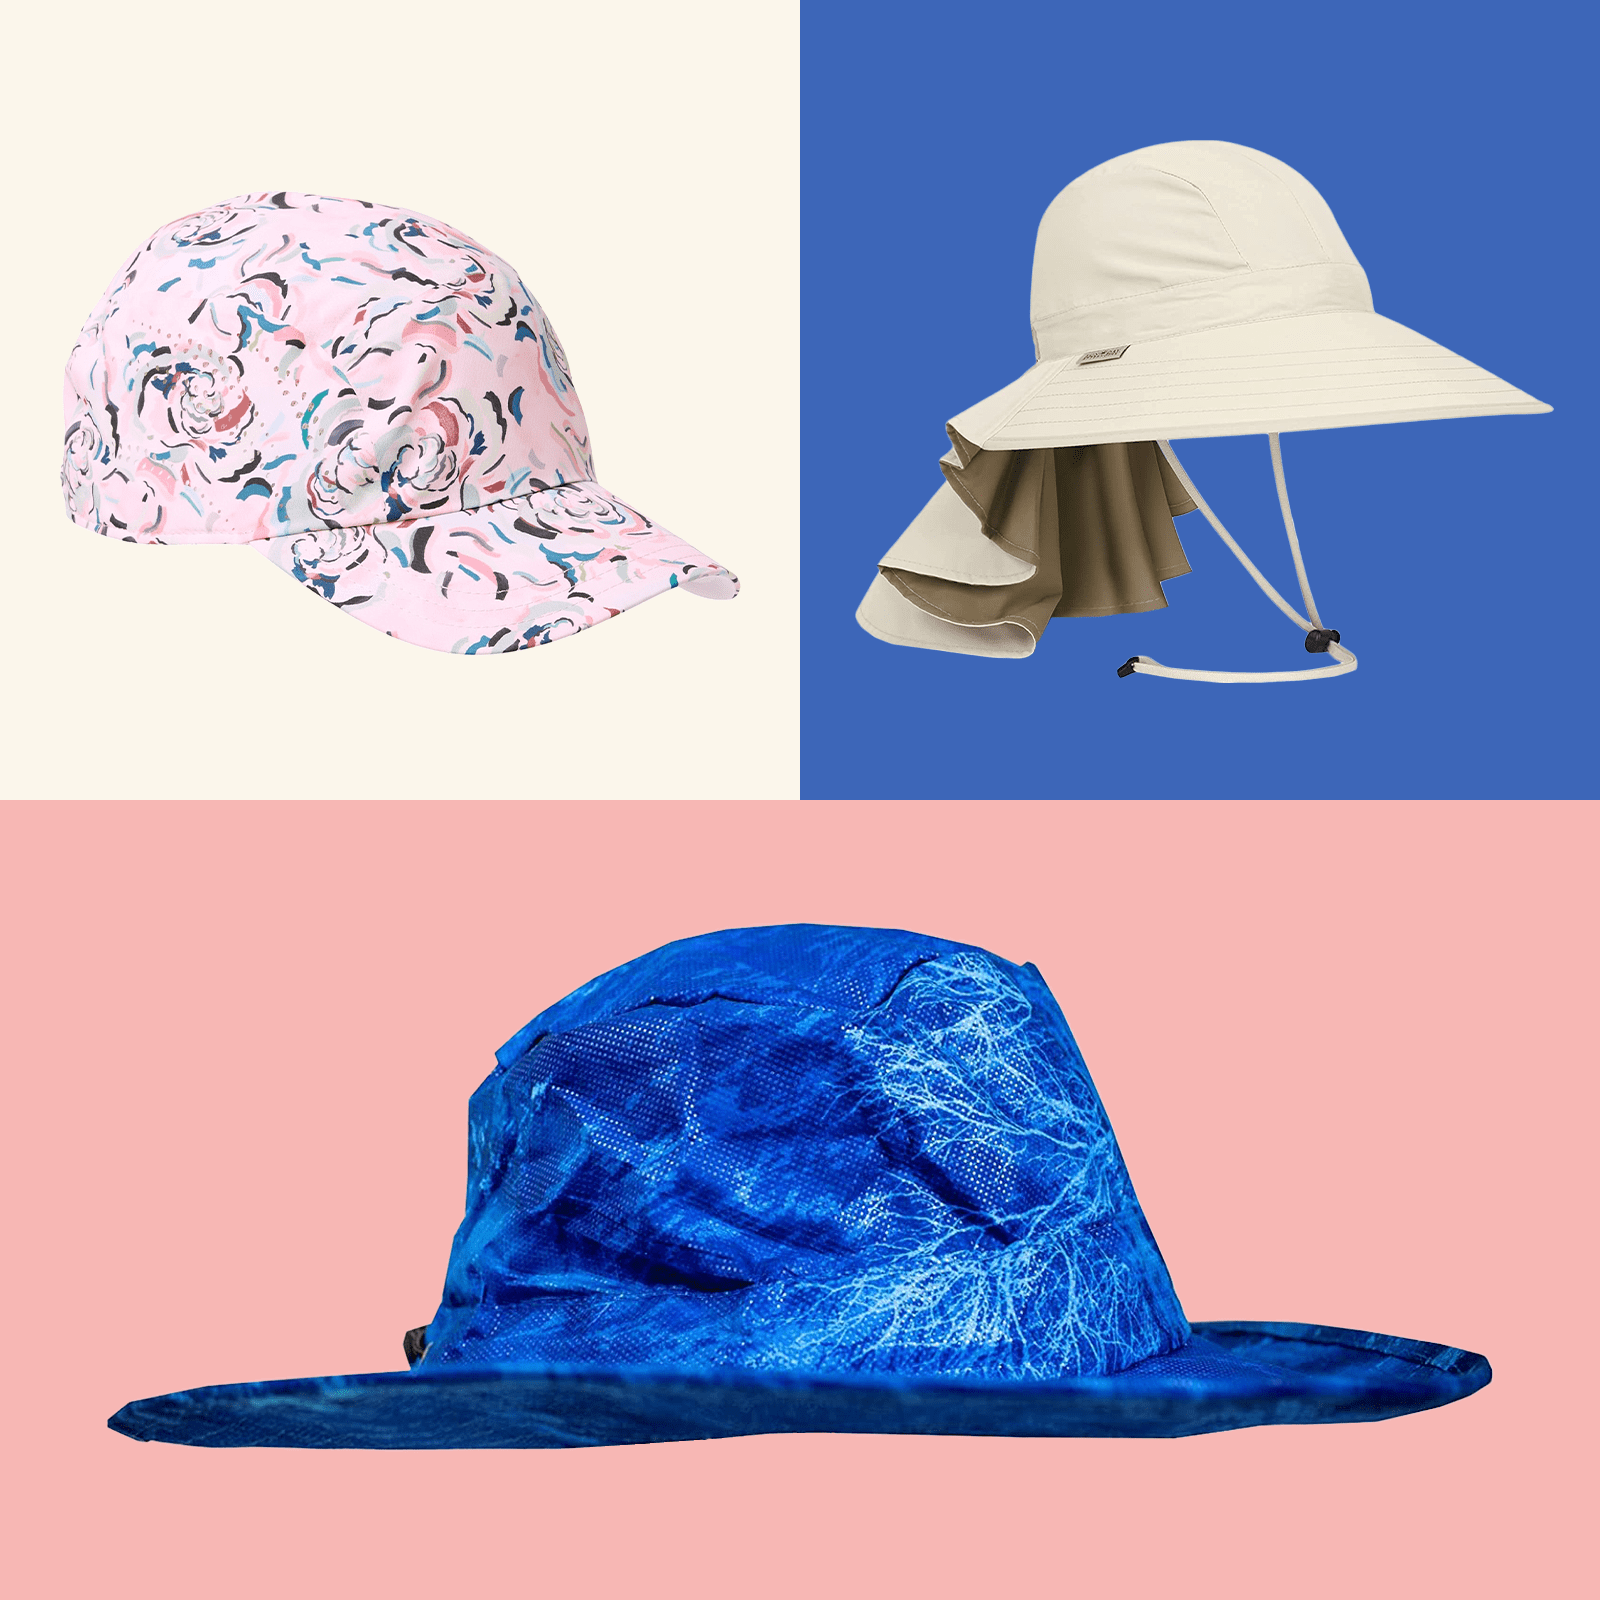 How to Clean A Hat: Baseball Caps, Bucket Hats, & Straw Hats